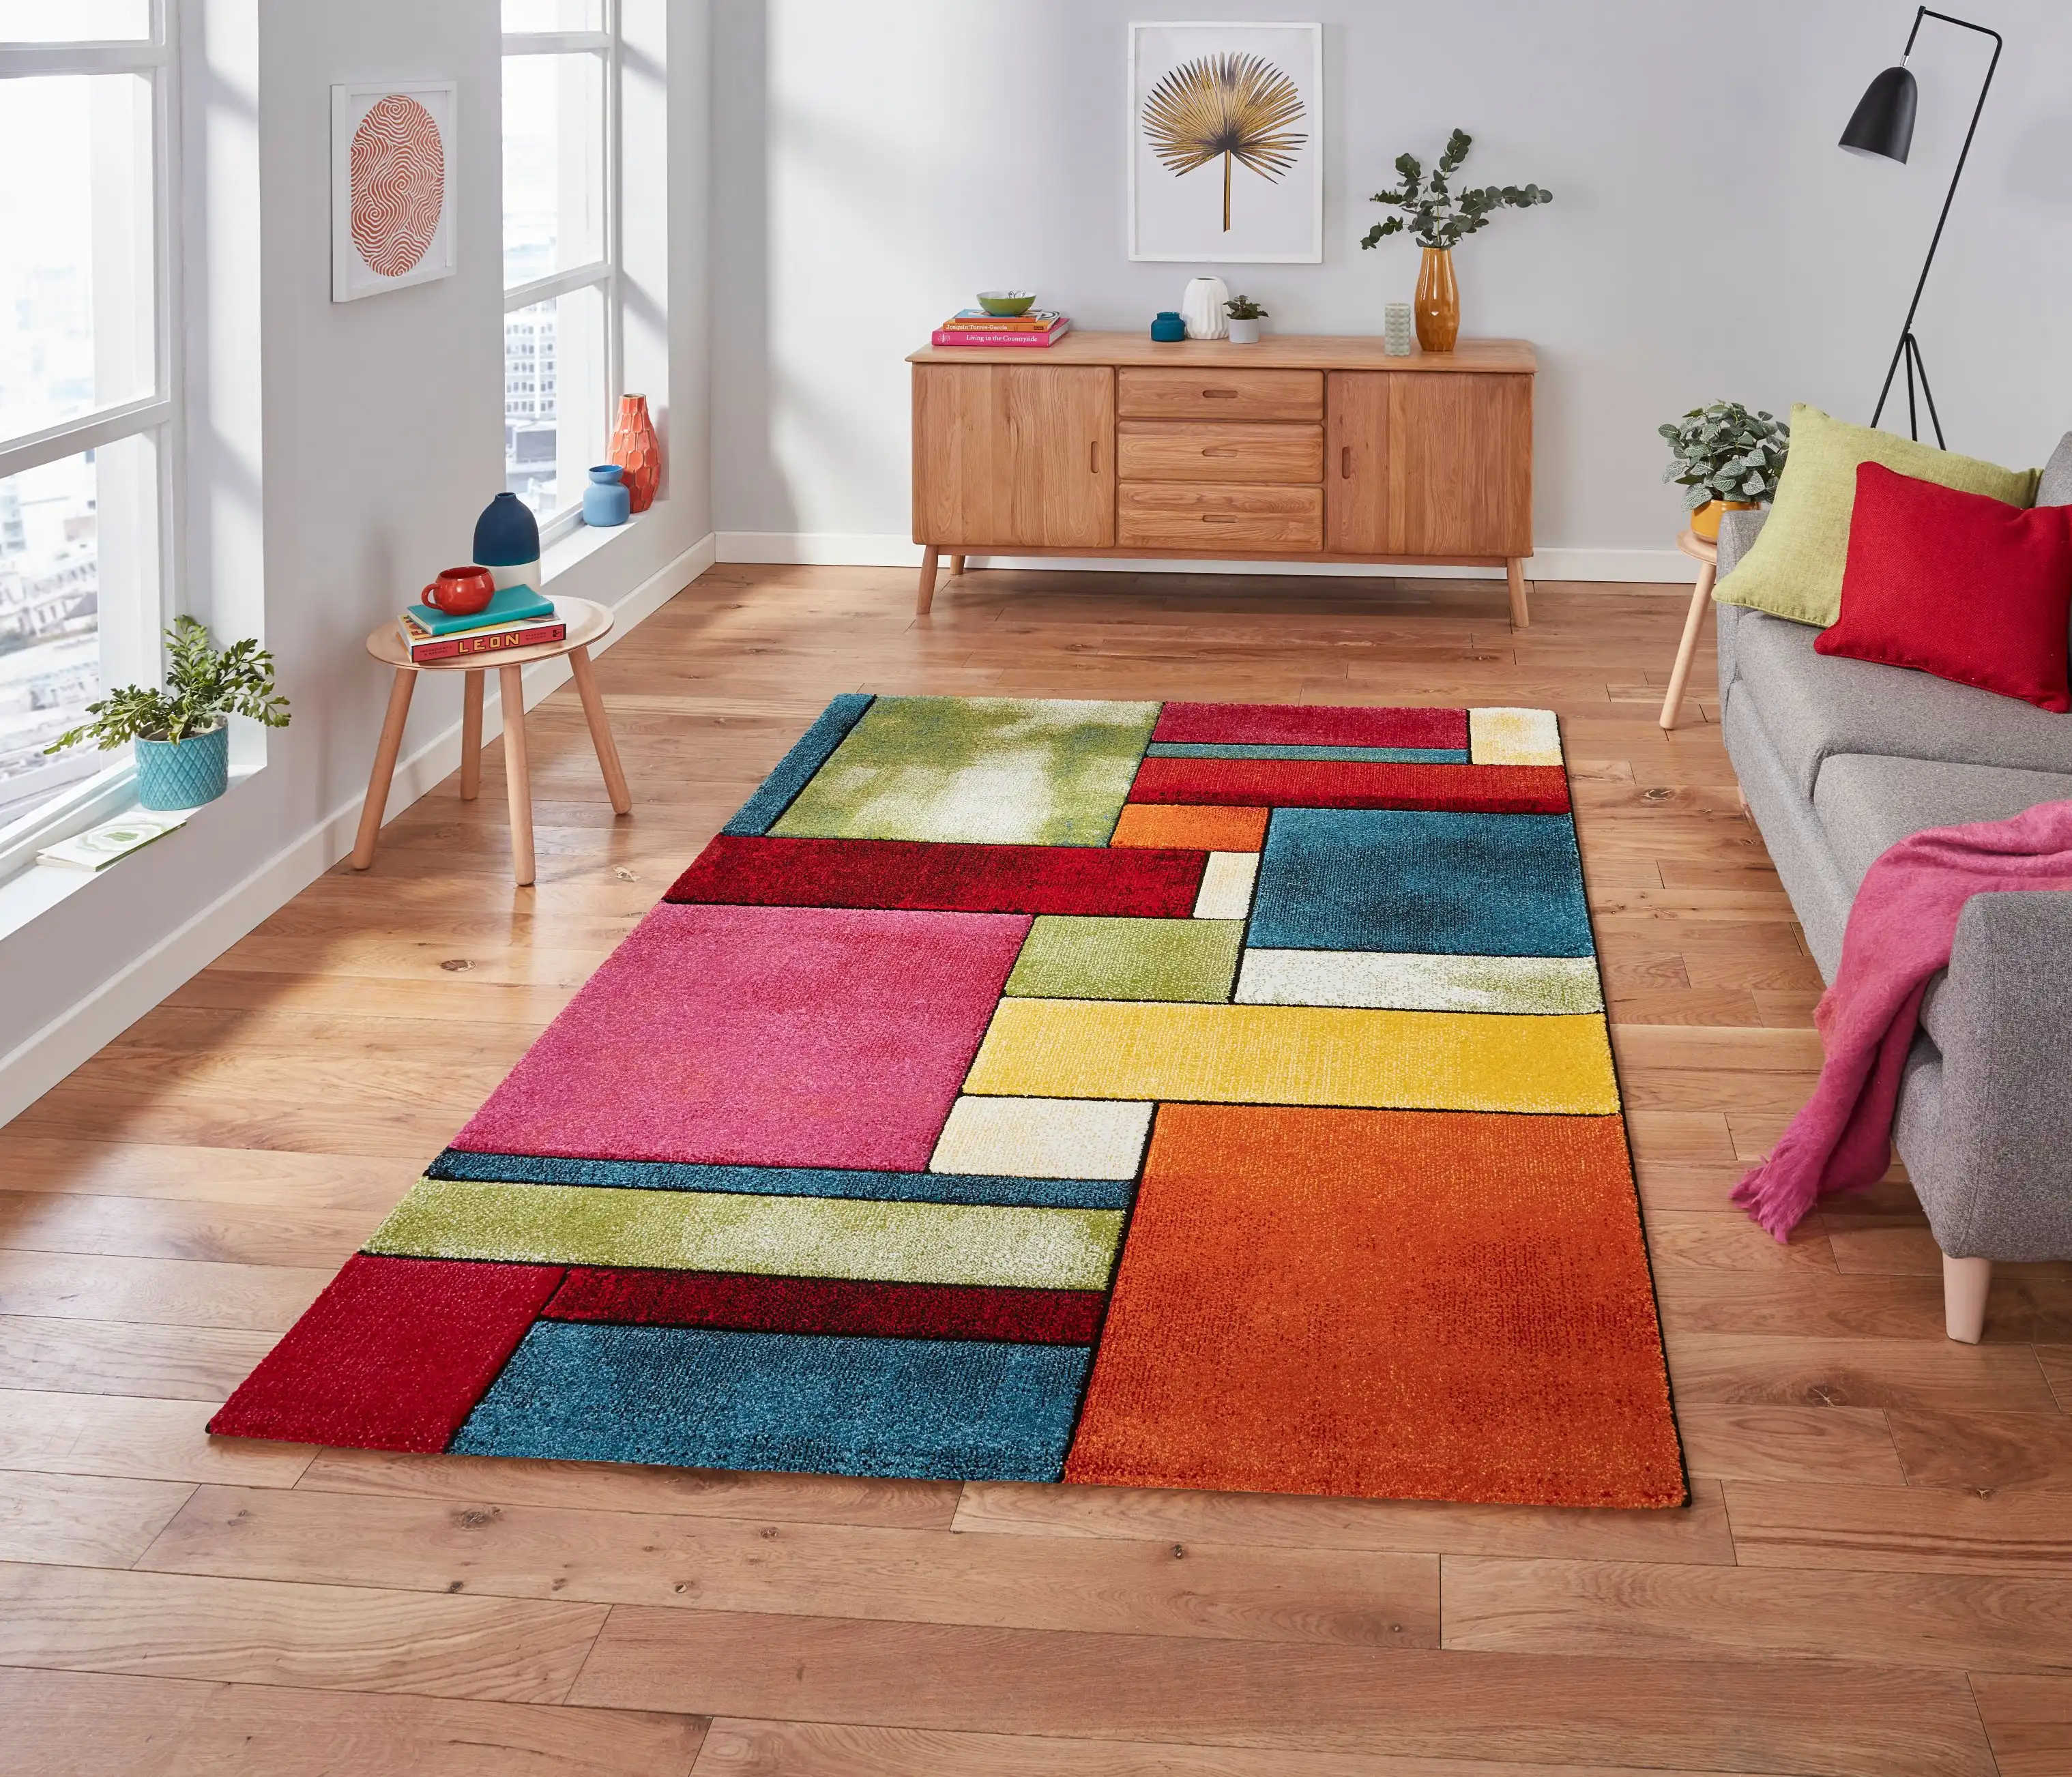 Funky Rugs Uk A Patterned Rug